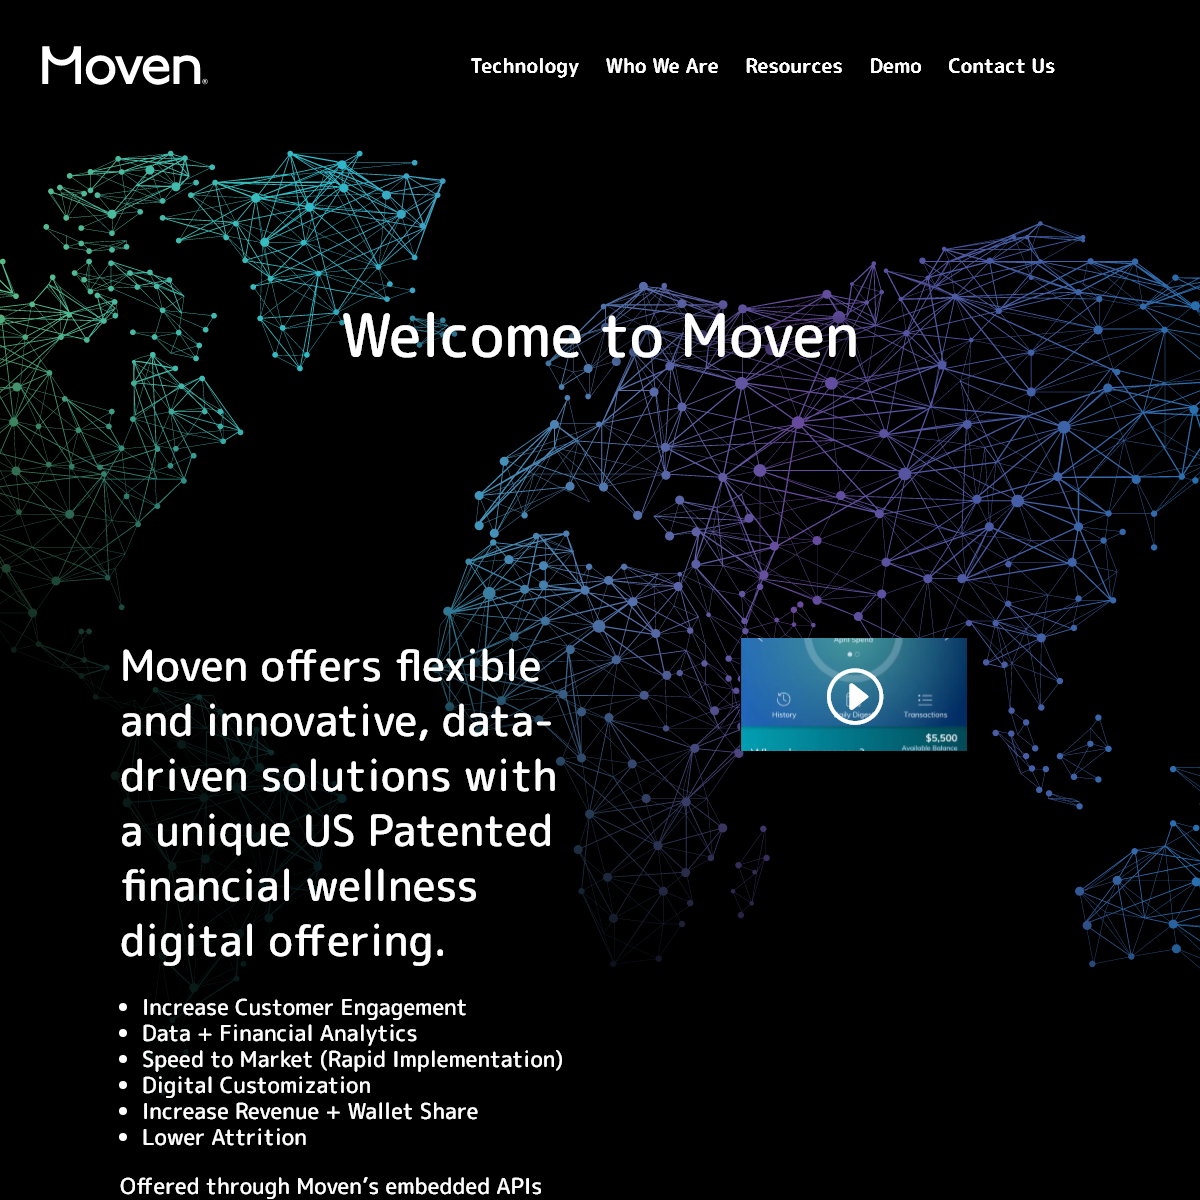 A complete backup of moven.com